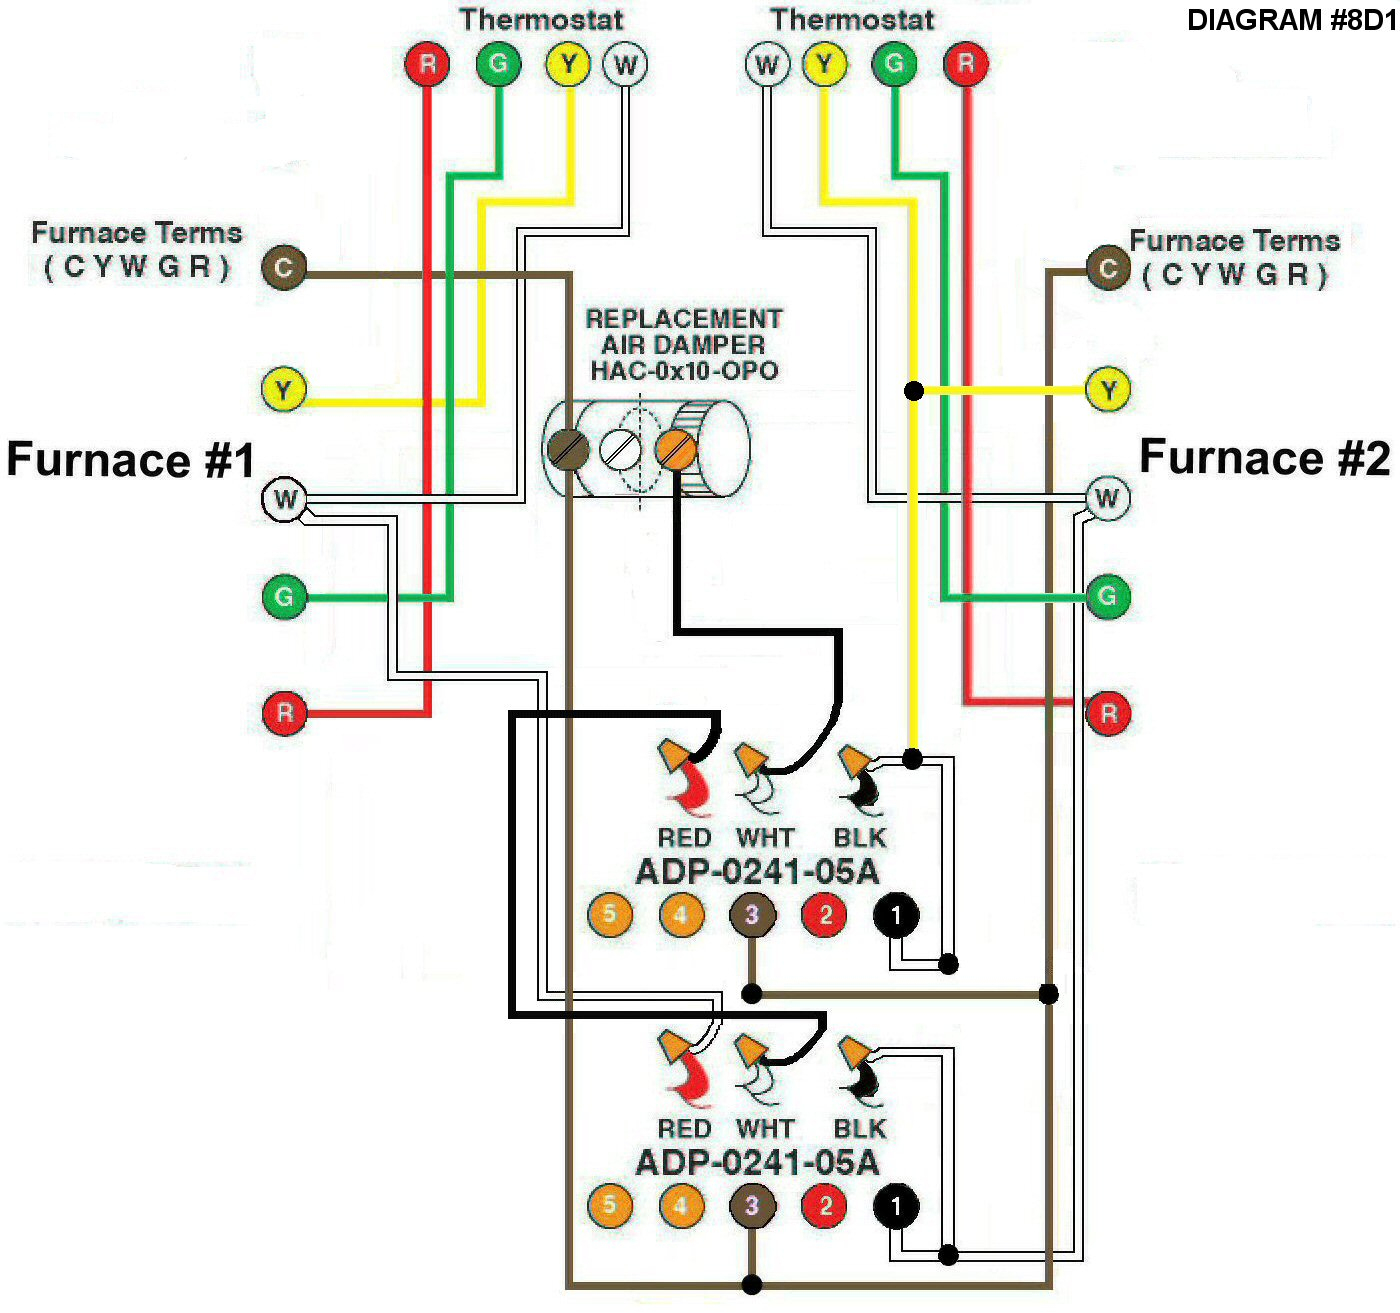 Carrier Bus Air Conditioning Wiring Diagram | Wiring Diagram - Carrier Air Conditioner Wiring Diagram